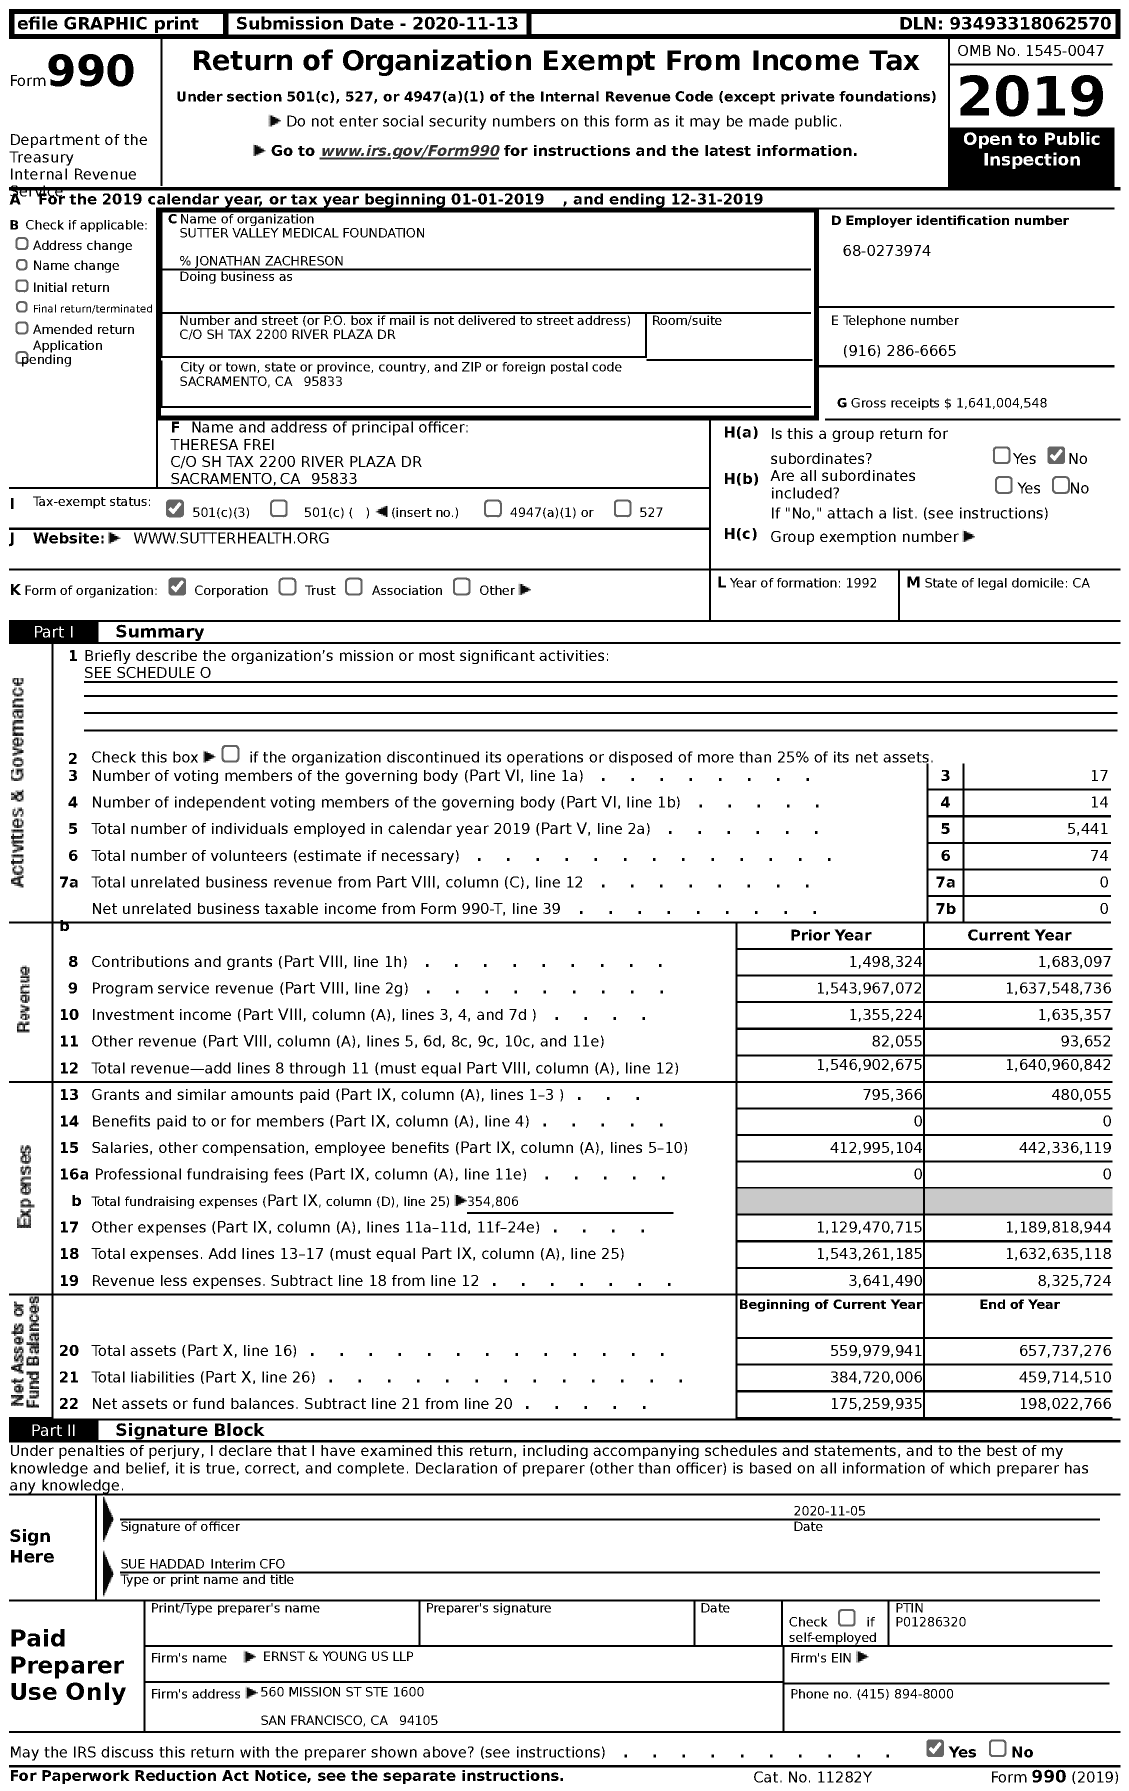 Image of first page of 2019 Form 990 for Sutter Medical Foundation (SMF)